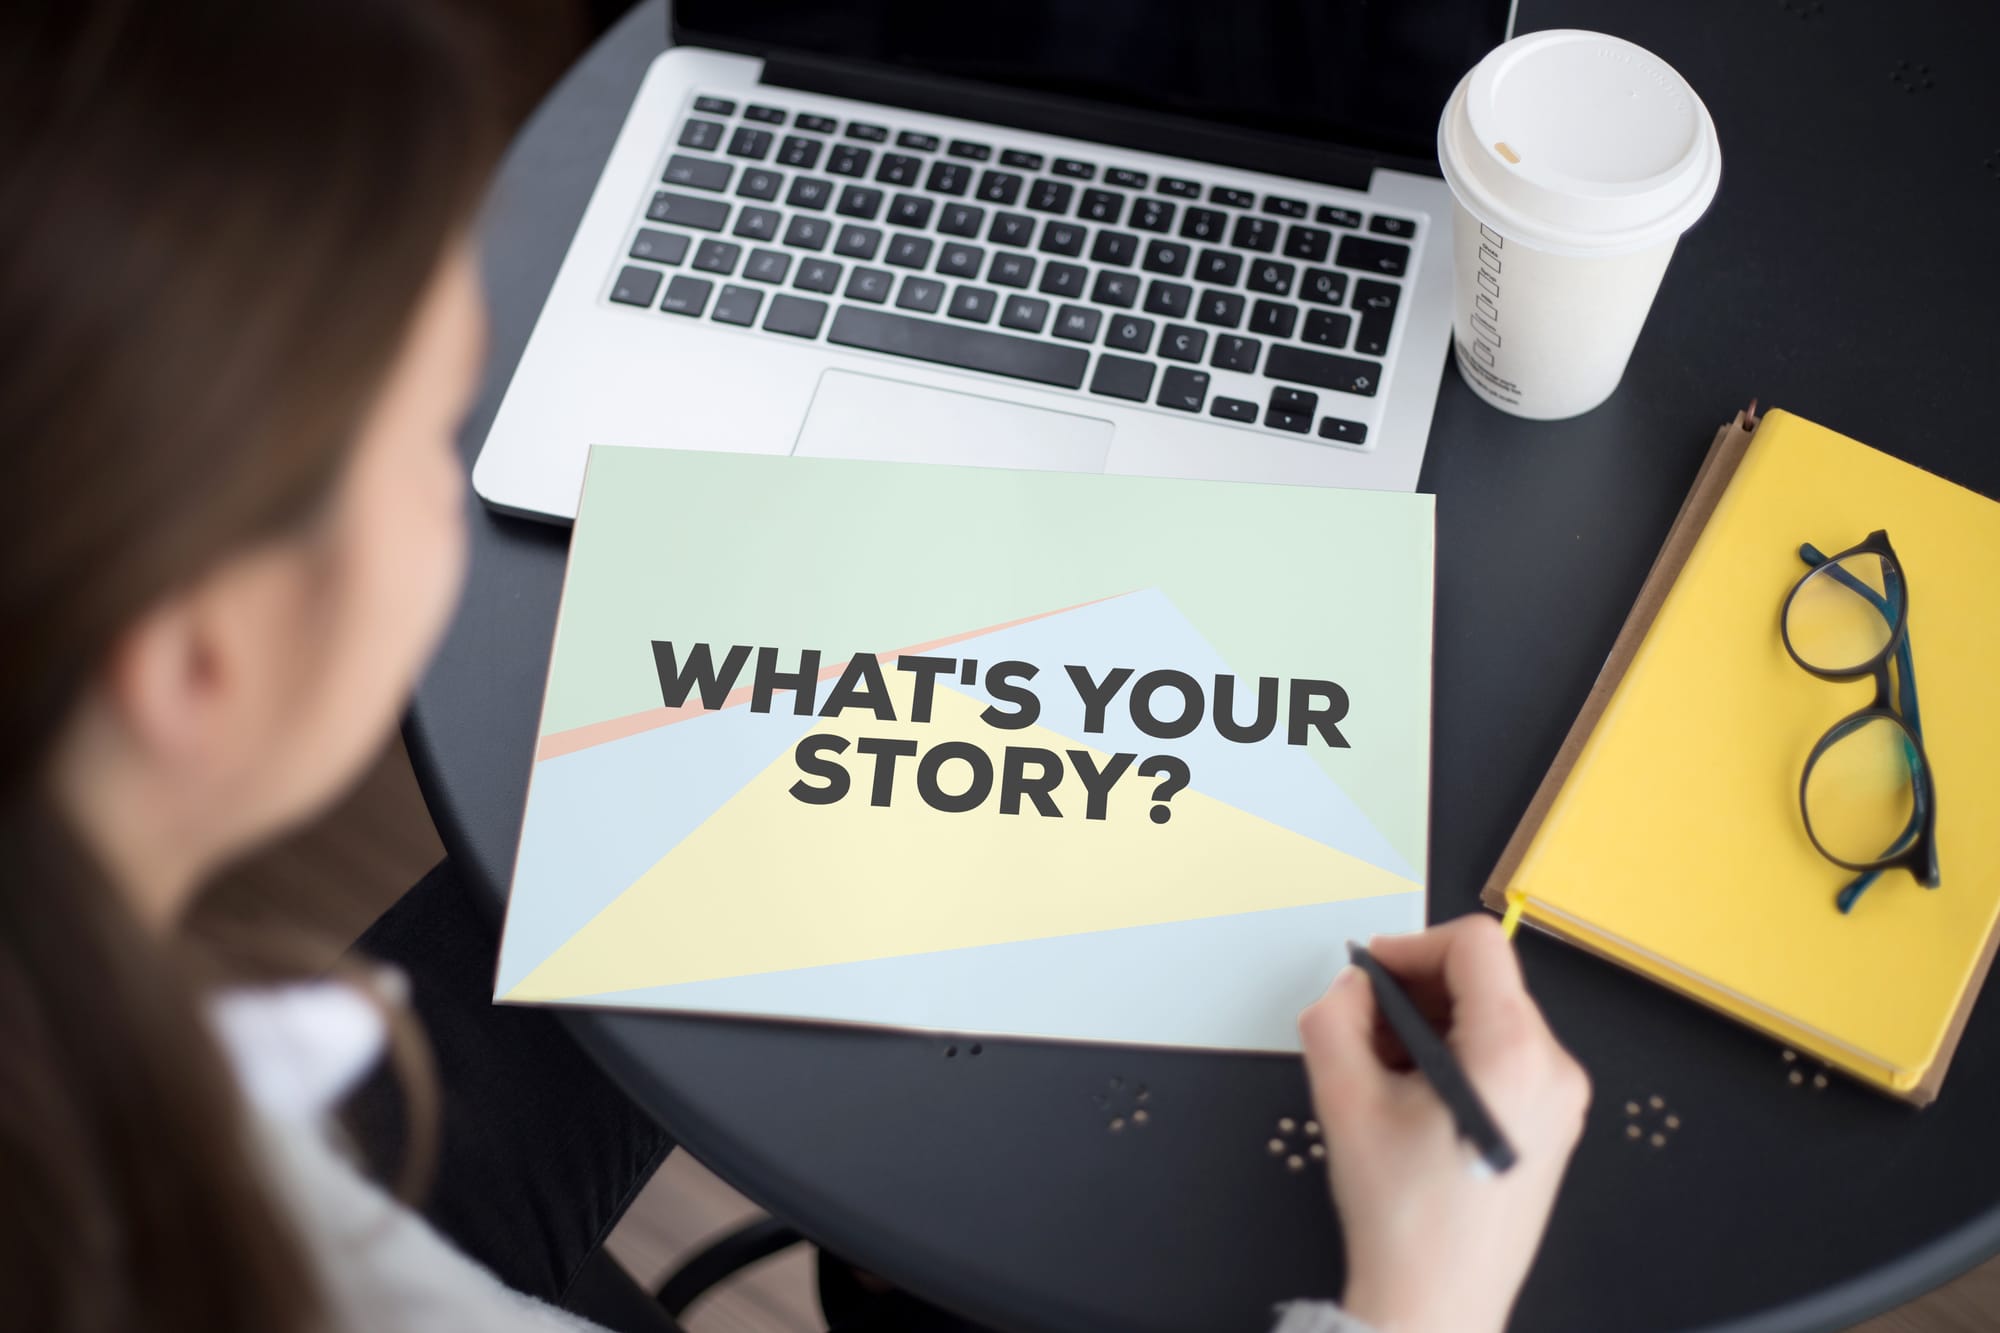 Is LinkedIn telling your story?